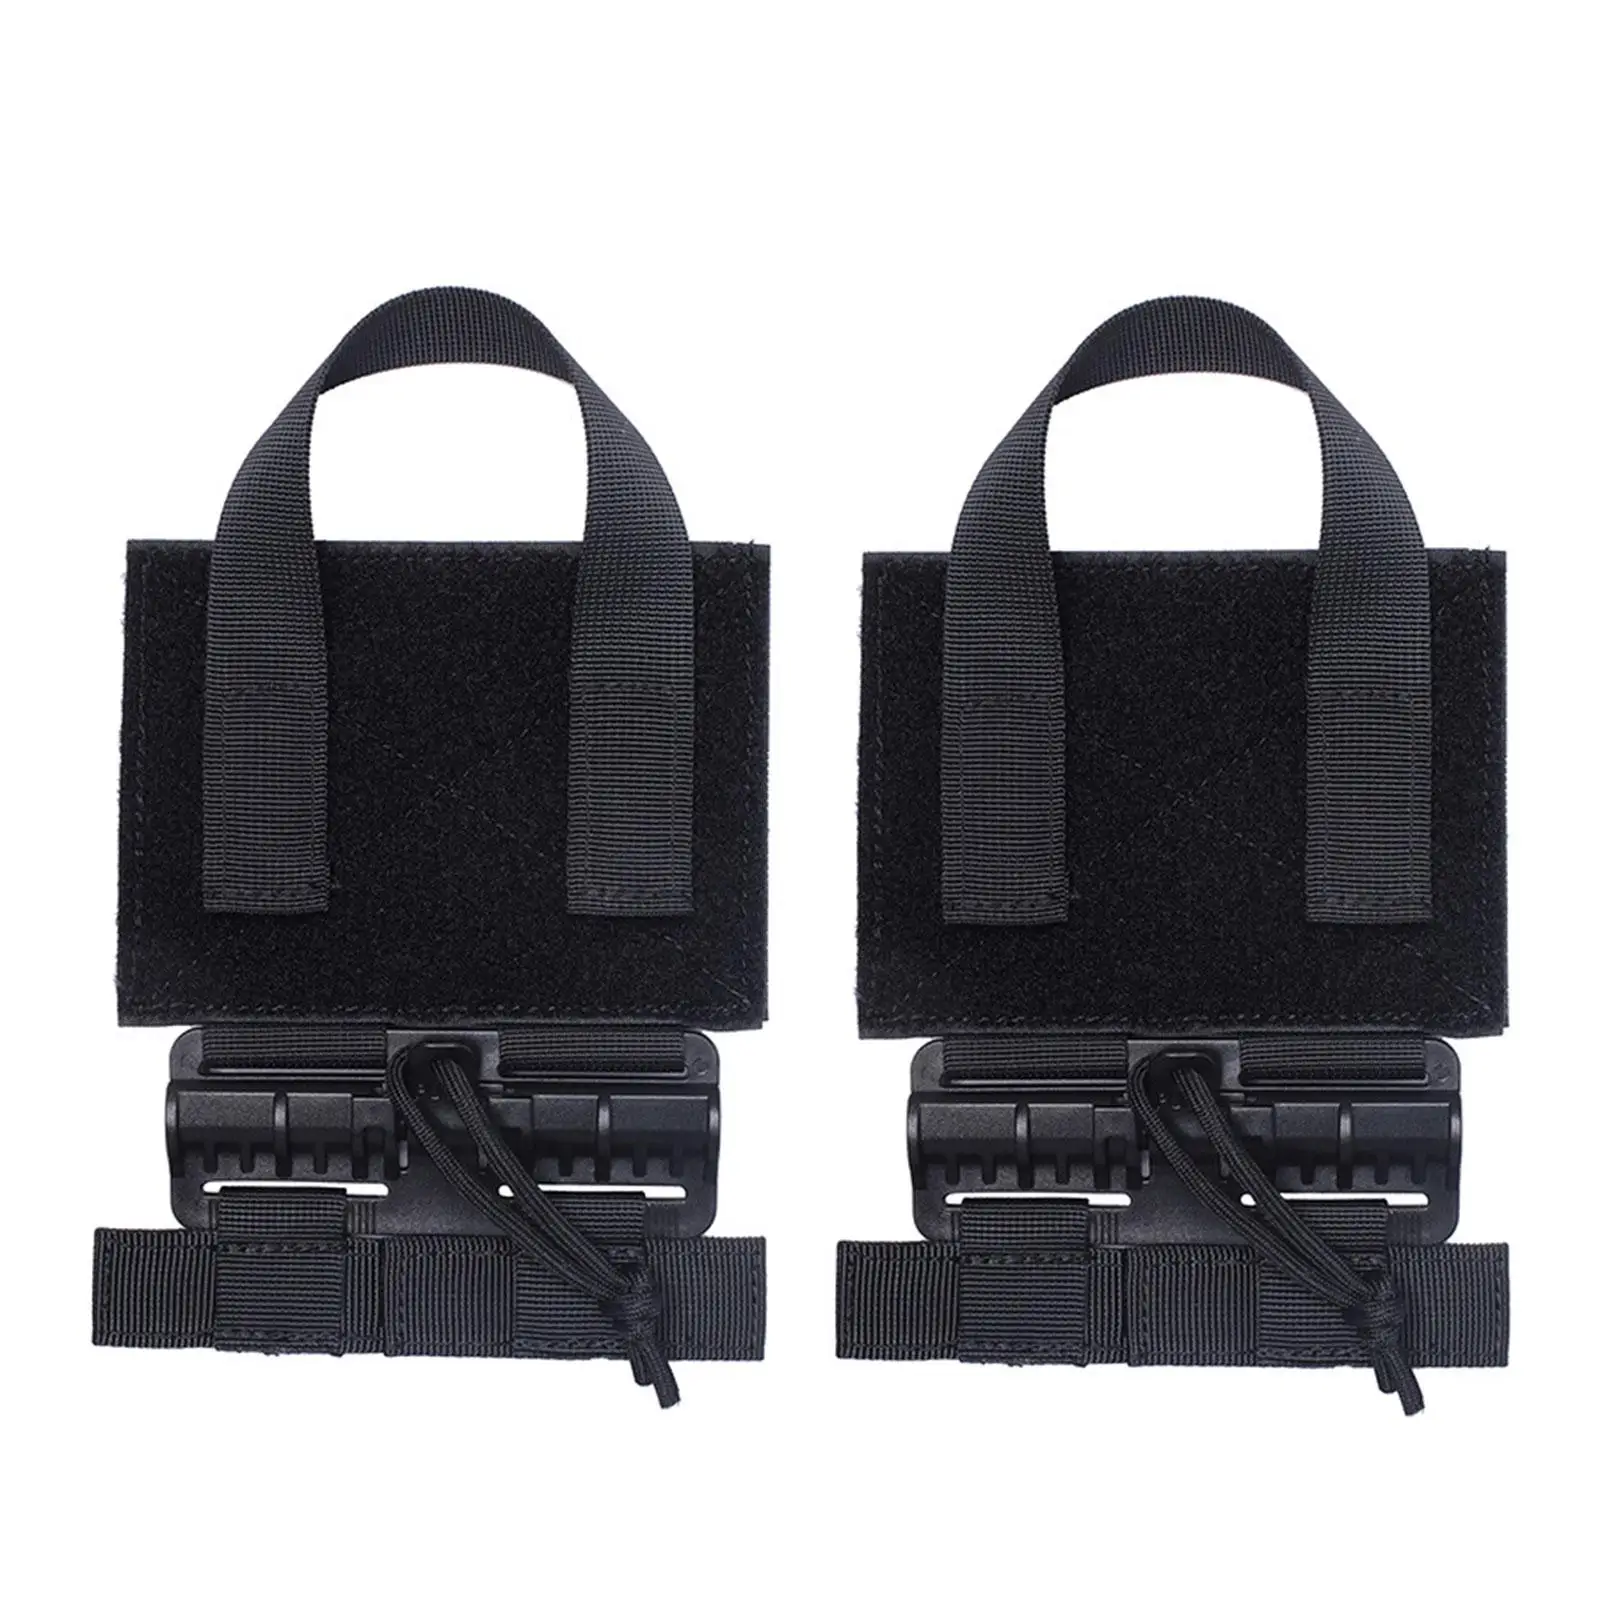 2x Quick Release Buckle Set Cummerbund Adapter Strap Clip Wear Resistant Accessories Quick Assembly for Cosplay Outdoor CS 6094